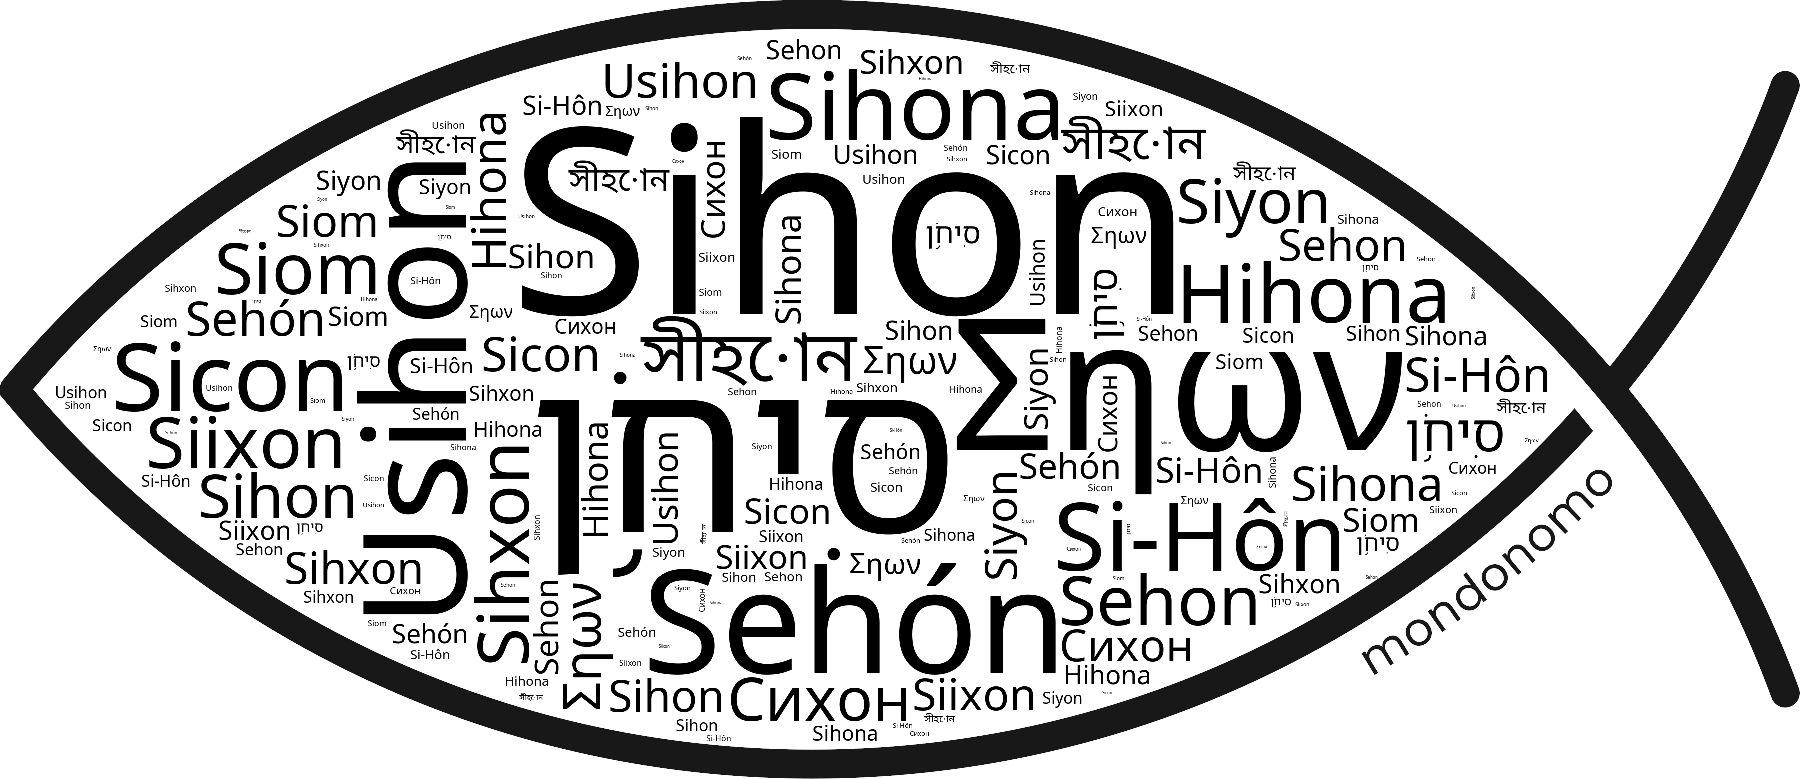 Name Sihon in the world's Bibles